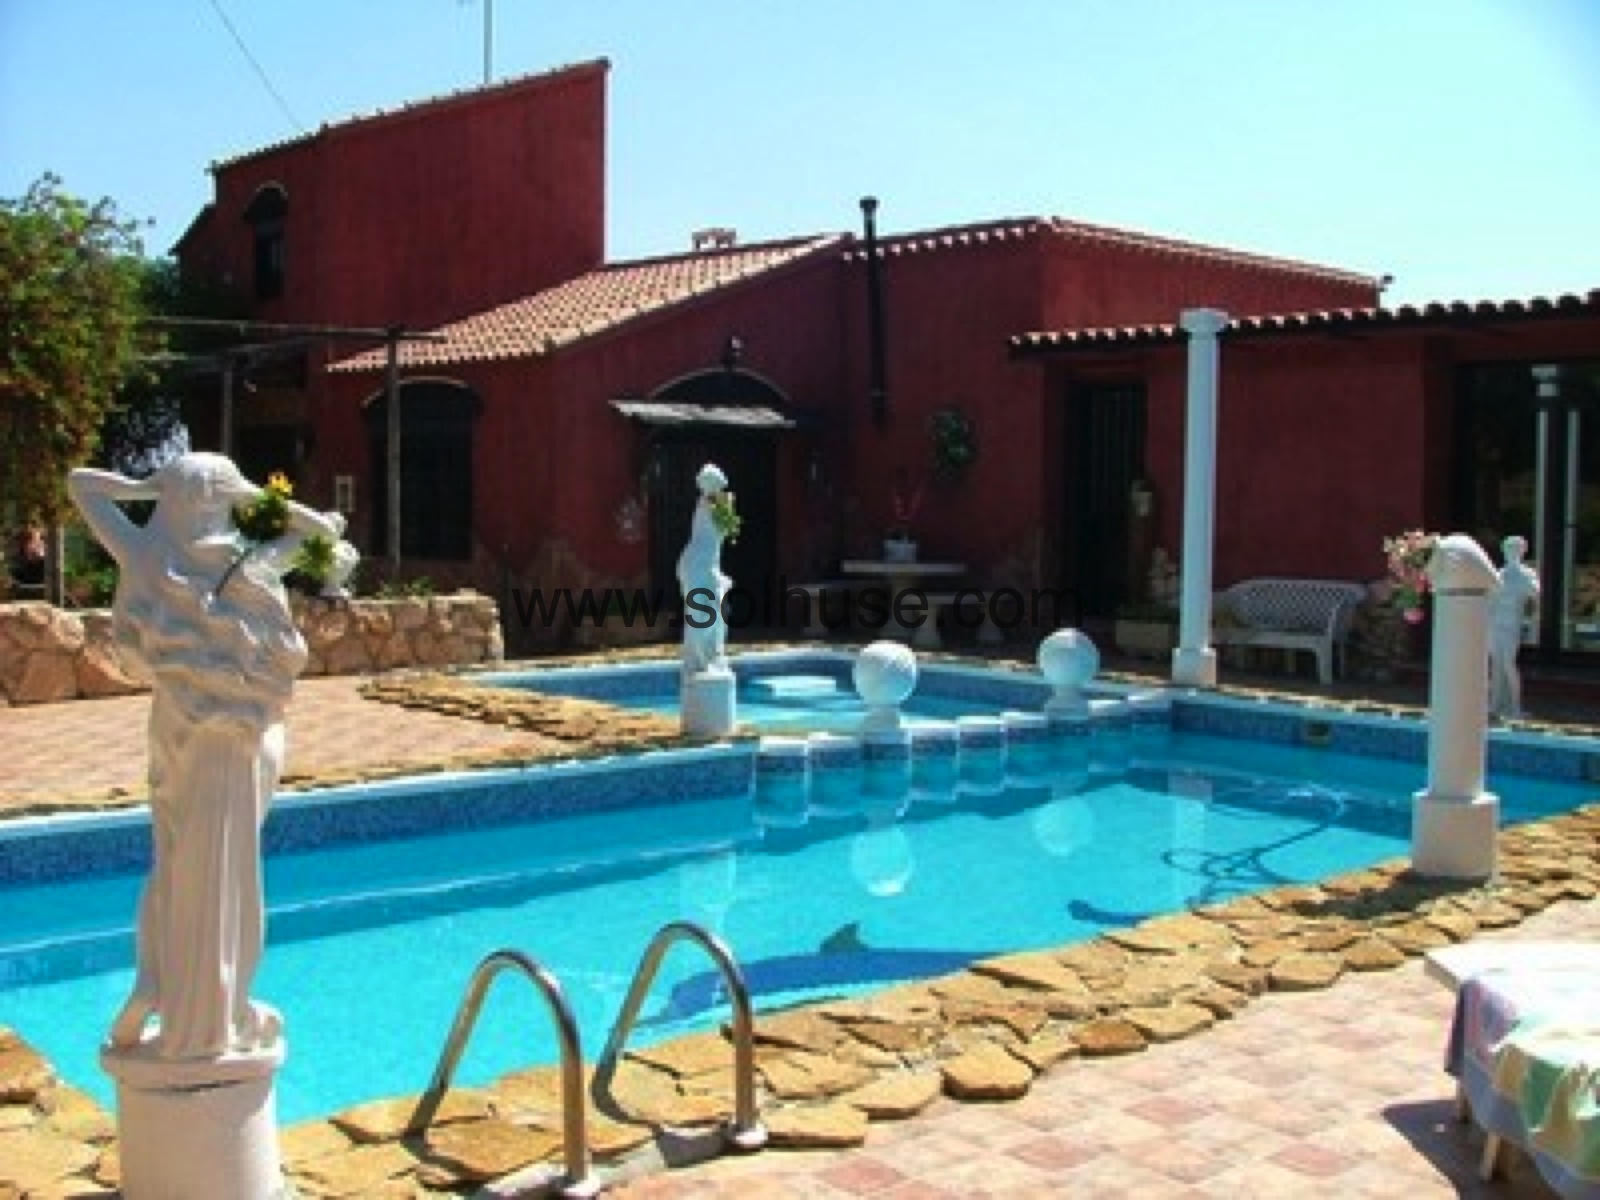 NEW LISTING - FABULOUS 3 BED FINCA WITH POOL ON LARGE PLOT IN ALEDO